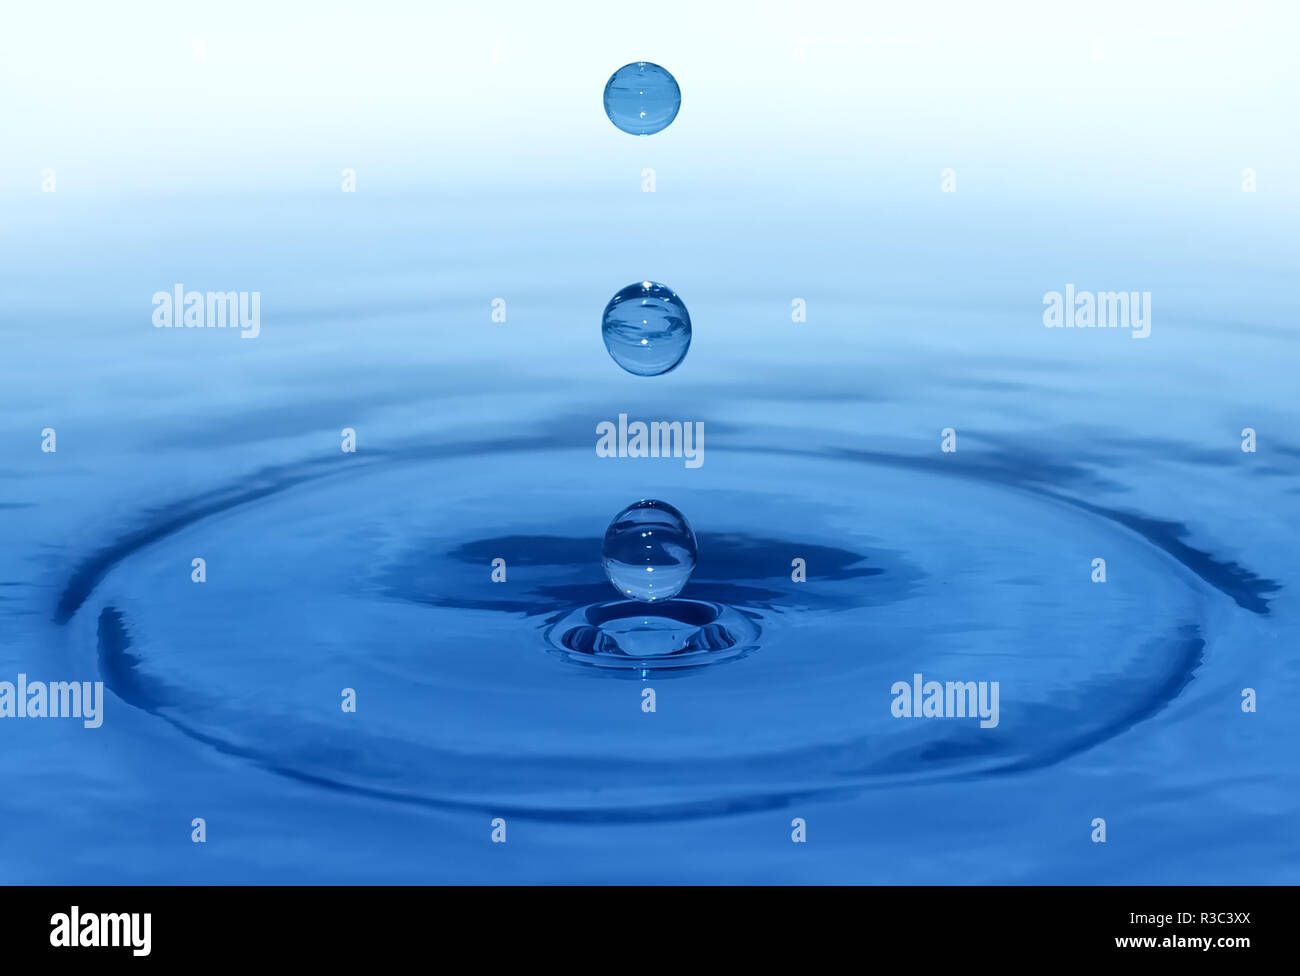 Raindrops falling on surface of water Stock Photo